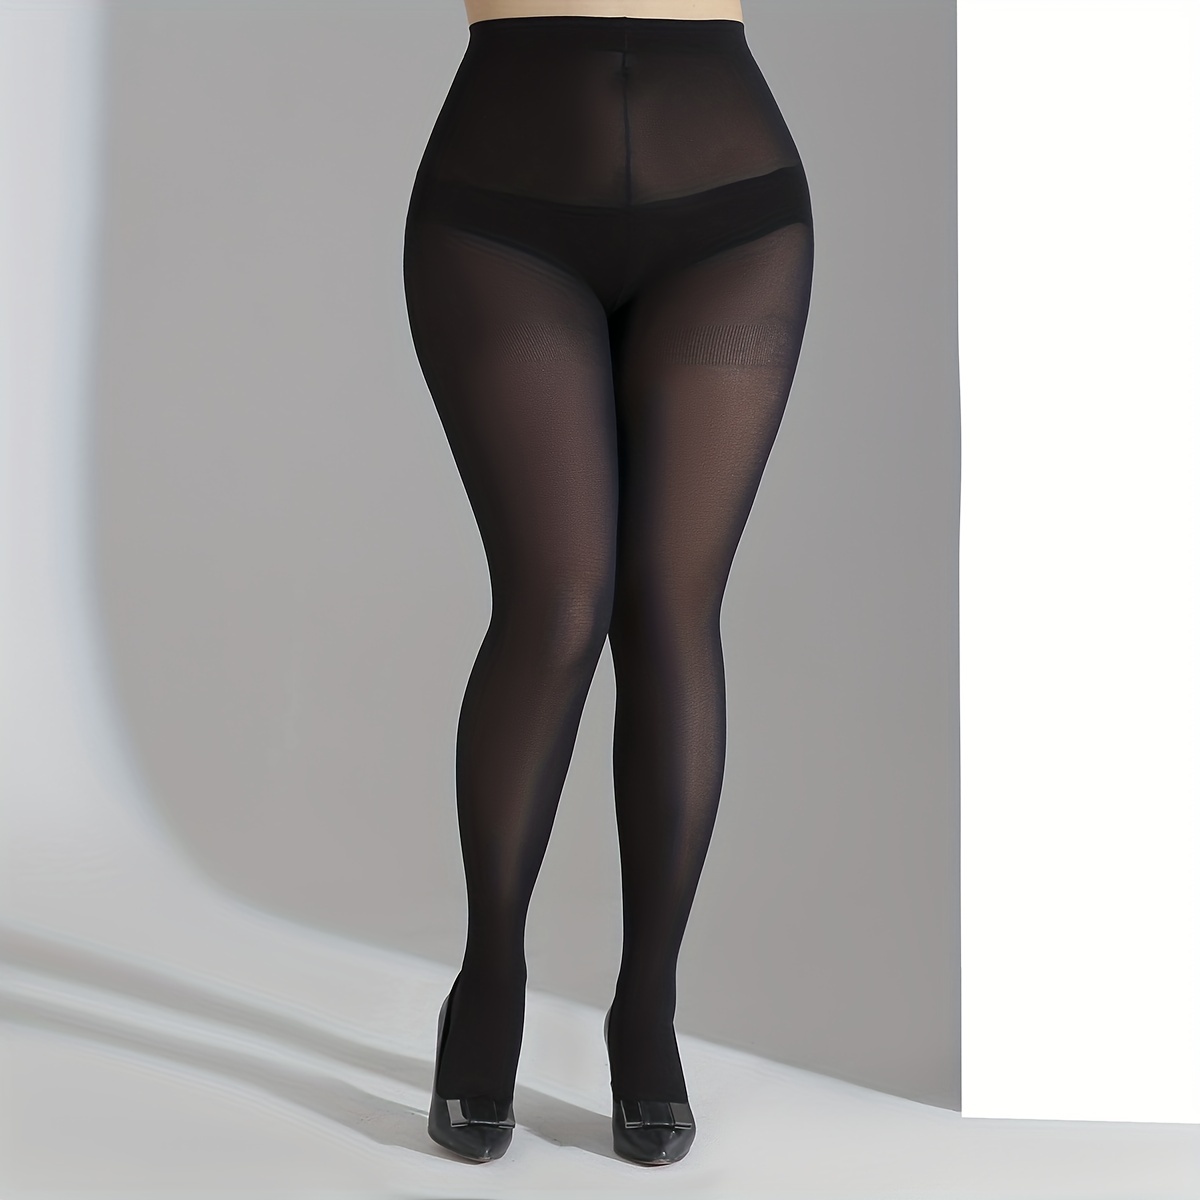 1pc Plus Size Sheer Pantyhose, Tights For Tall Women, Slimming